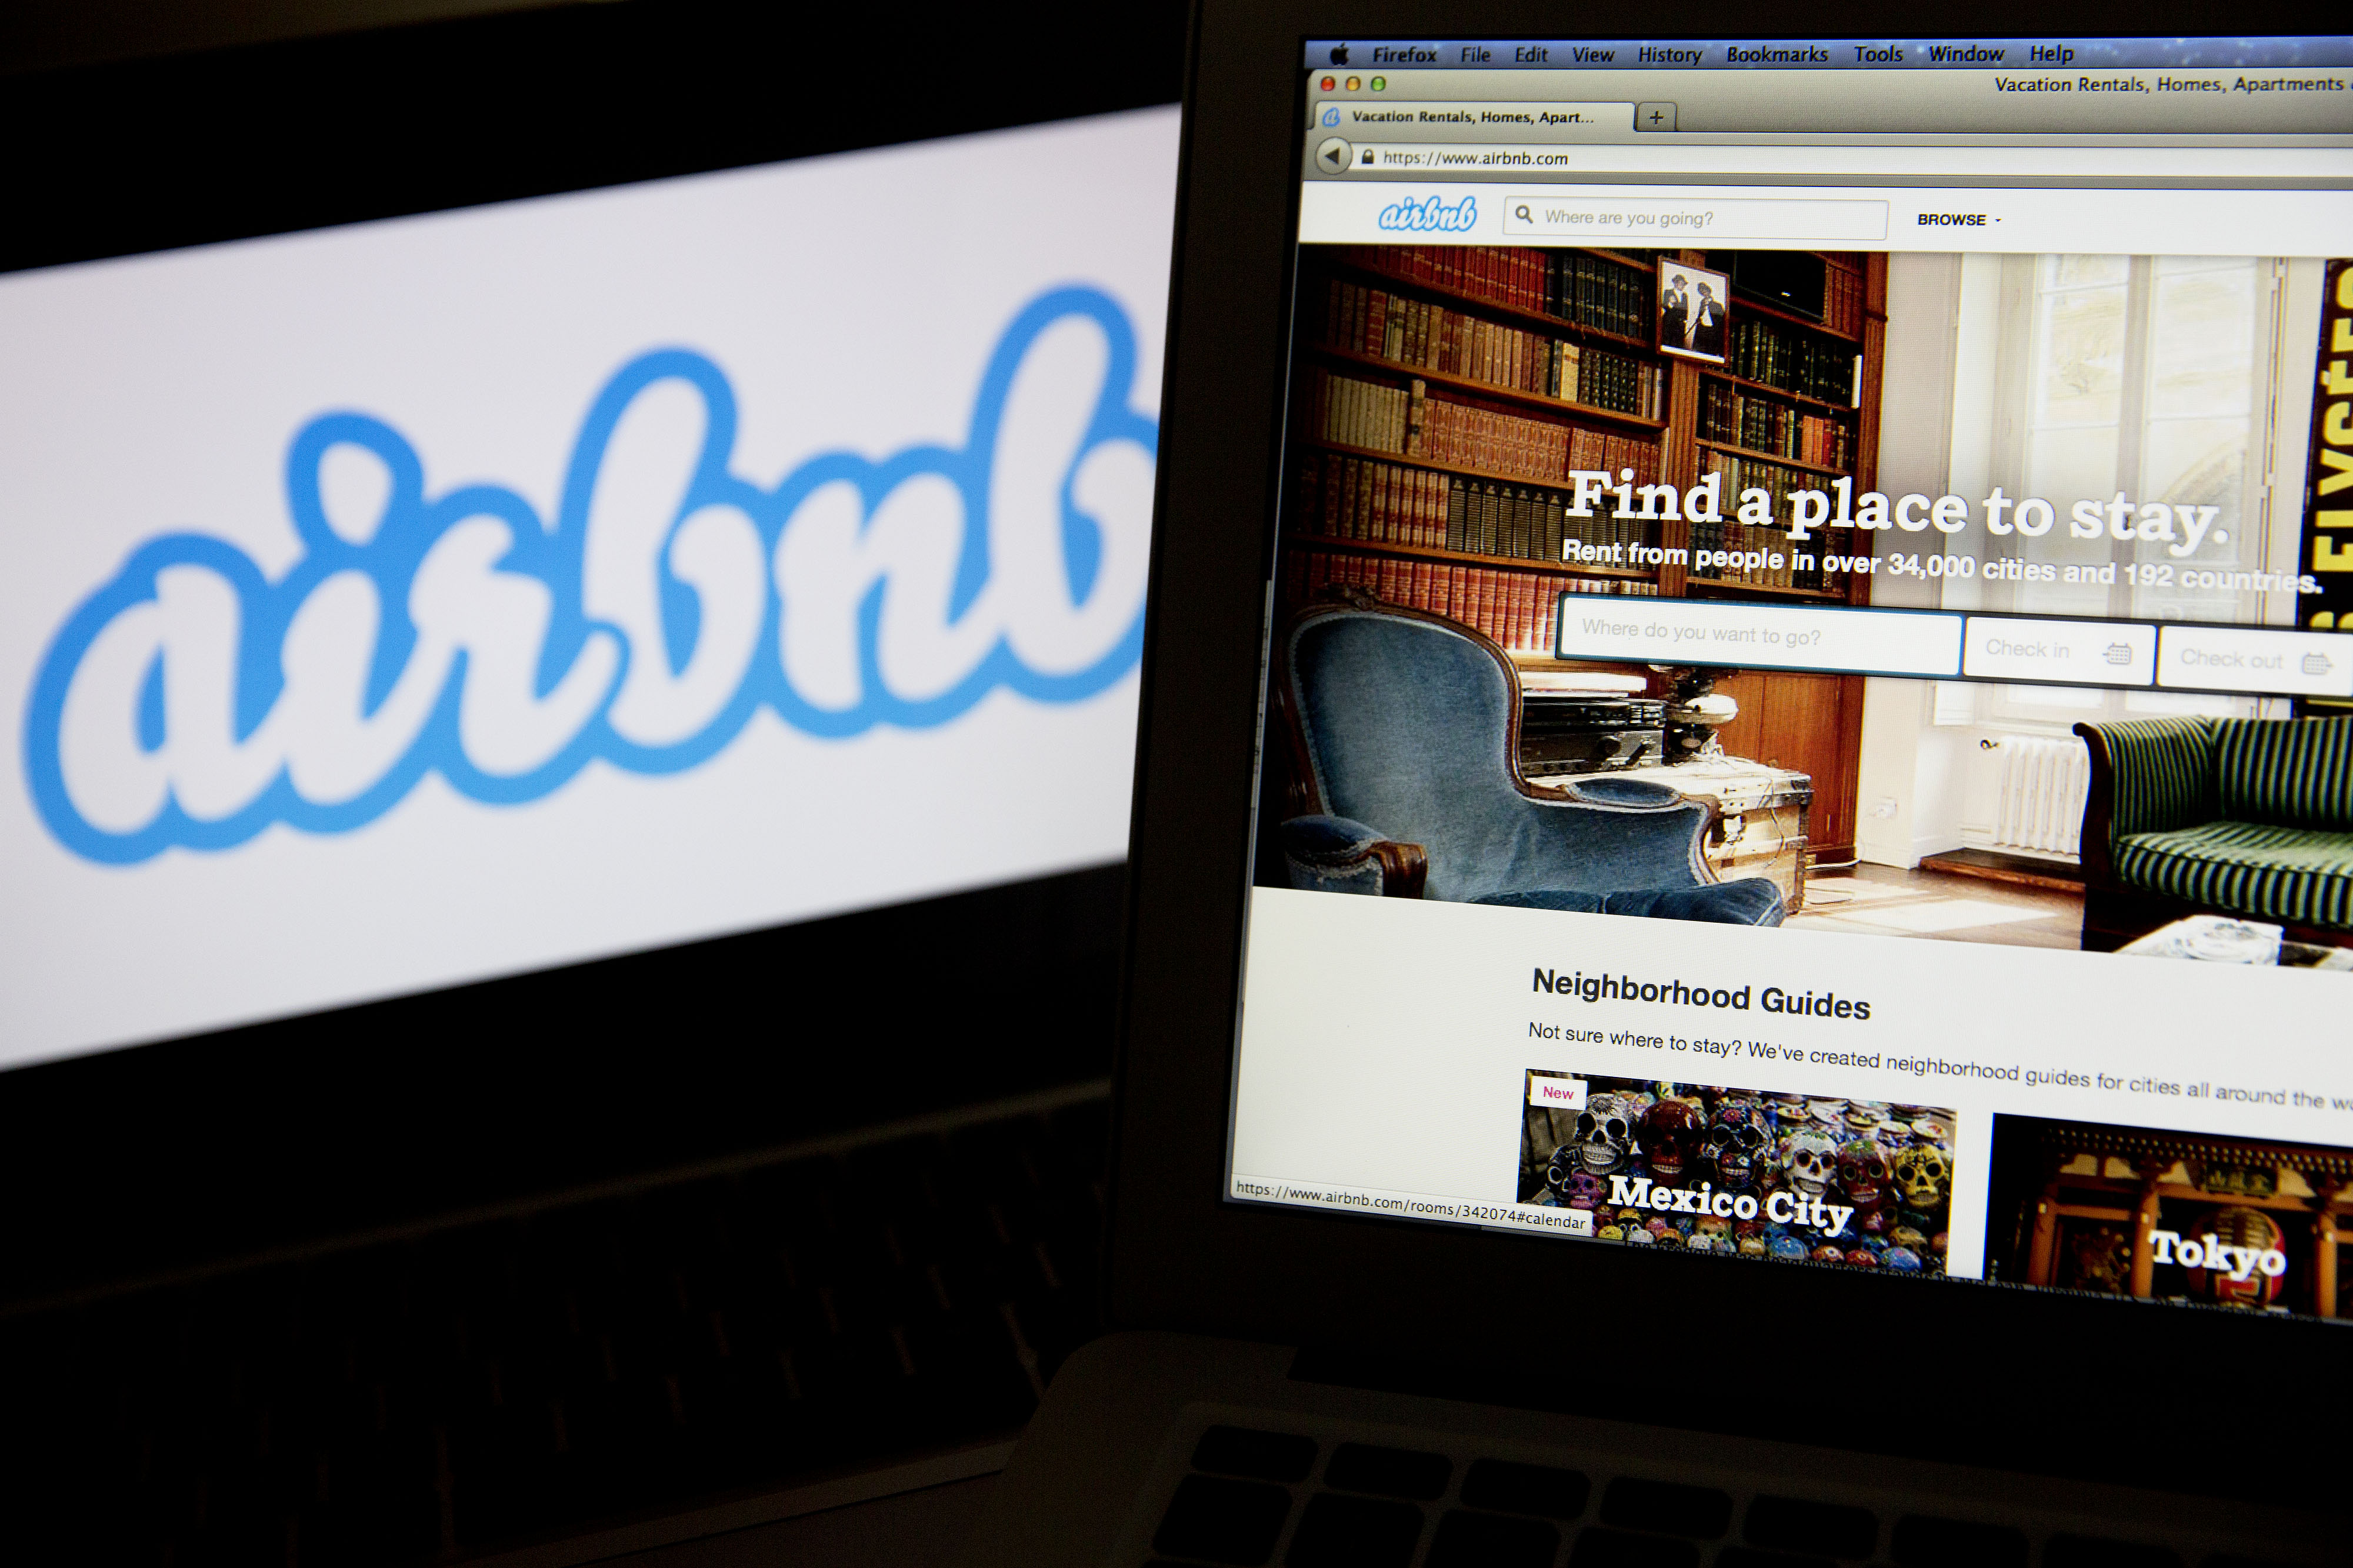 The Airbnb Inc. logo and website are displayed on laptop computers in this arranged photograph in Washington, D.C., U.S., on Friday, March 21, 2014. (Andrew Harrer—Bloomberg/Getty Images)